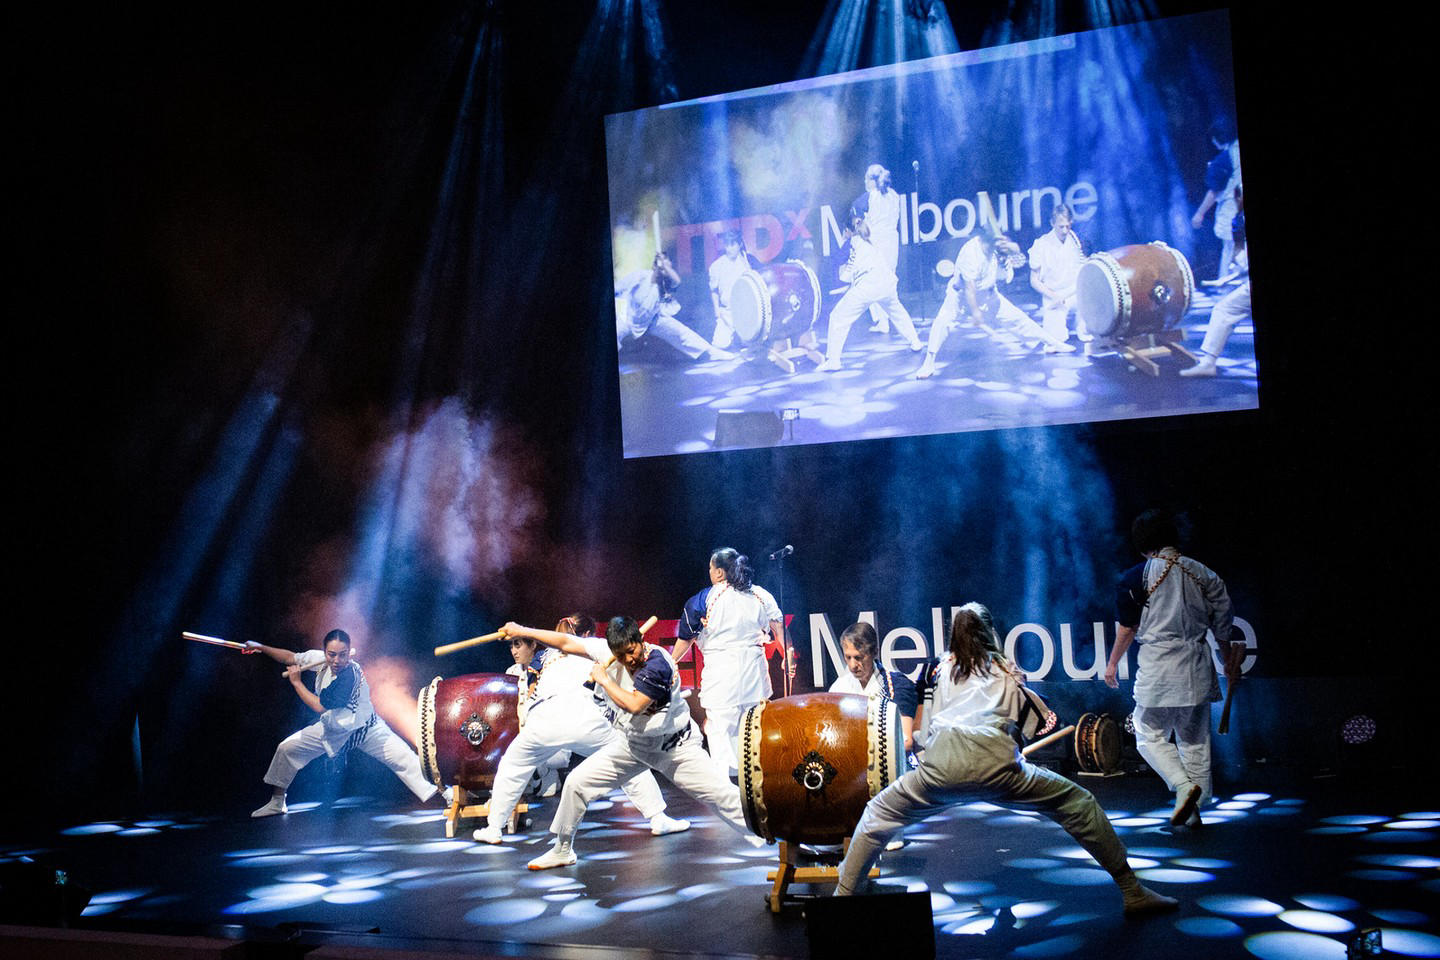 image  1 Long-time event #TEDxMelbourne in Australia creates some striking scenes at its event themed “Kintsu